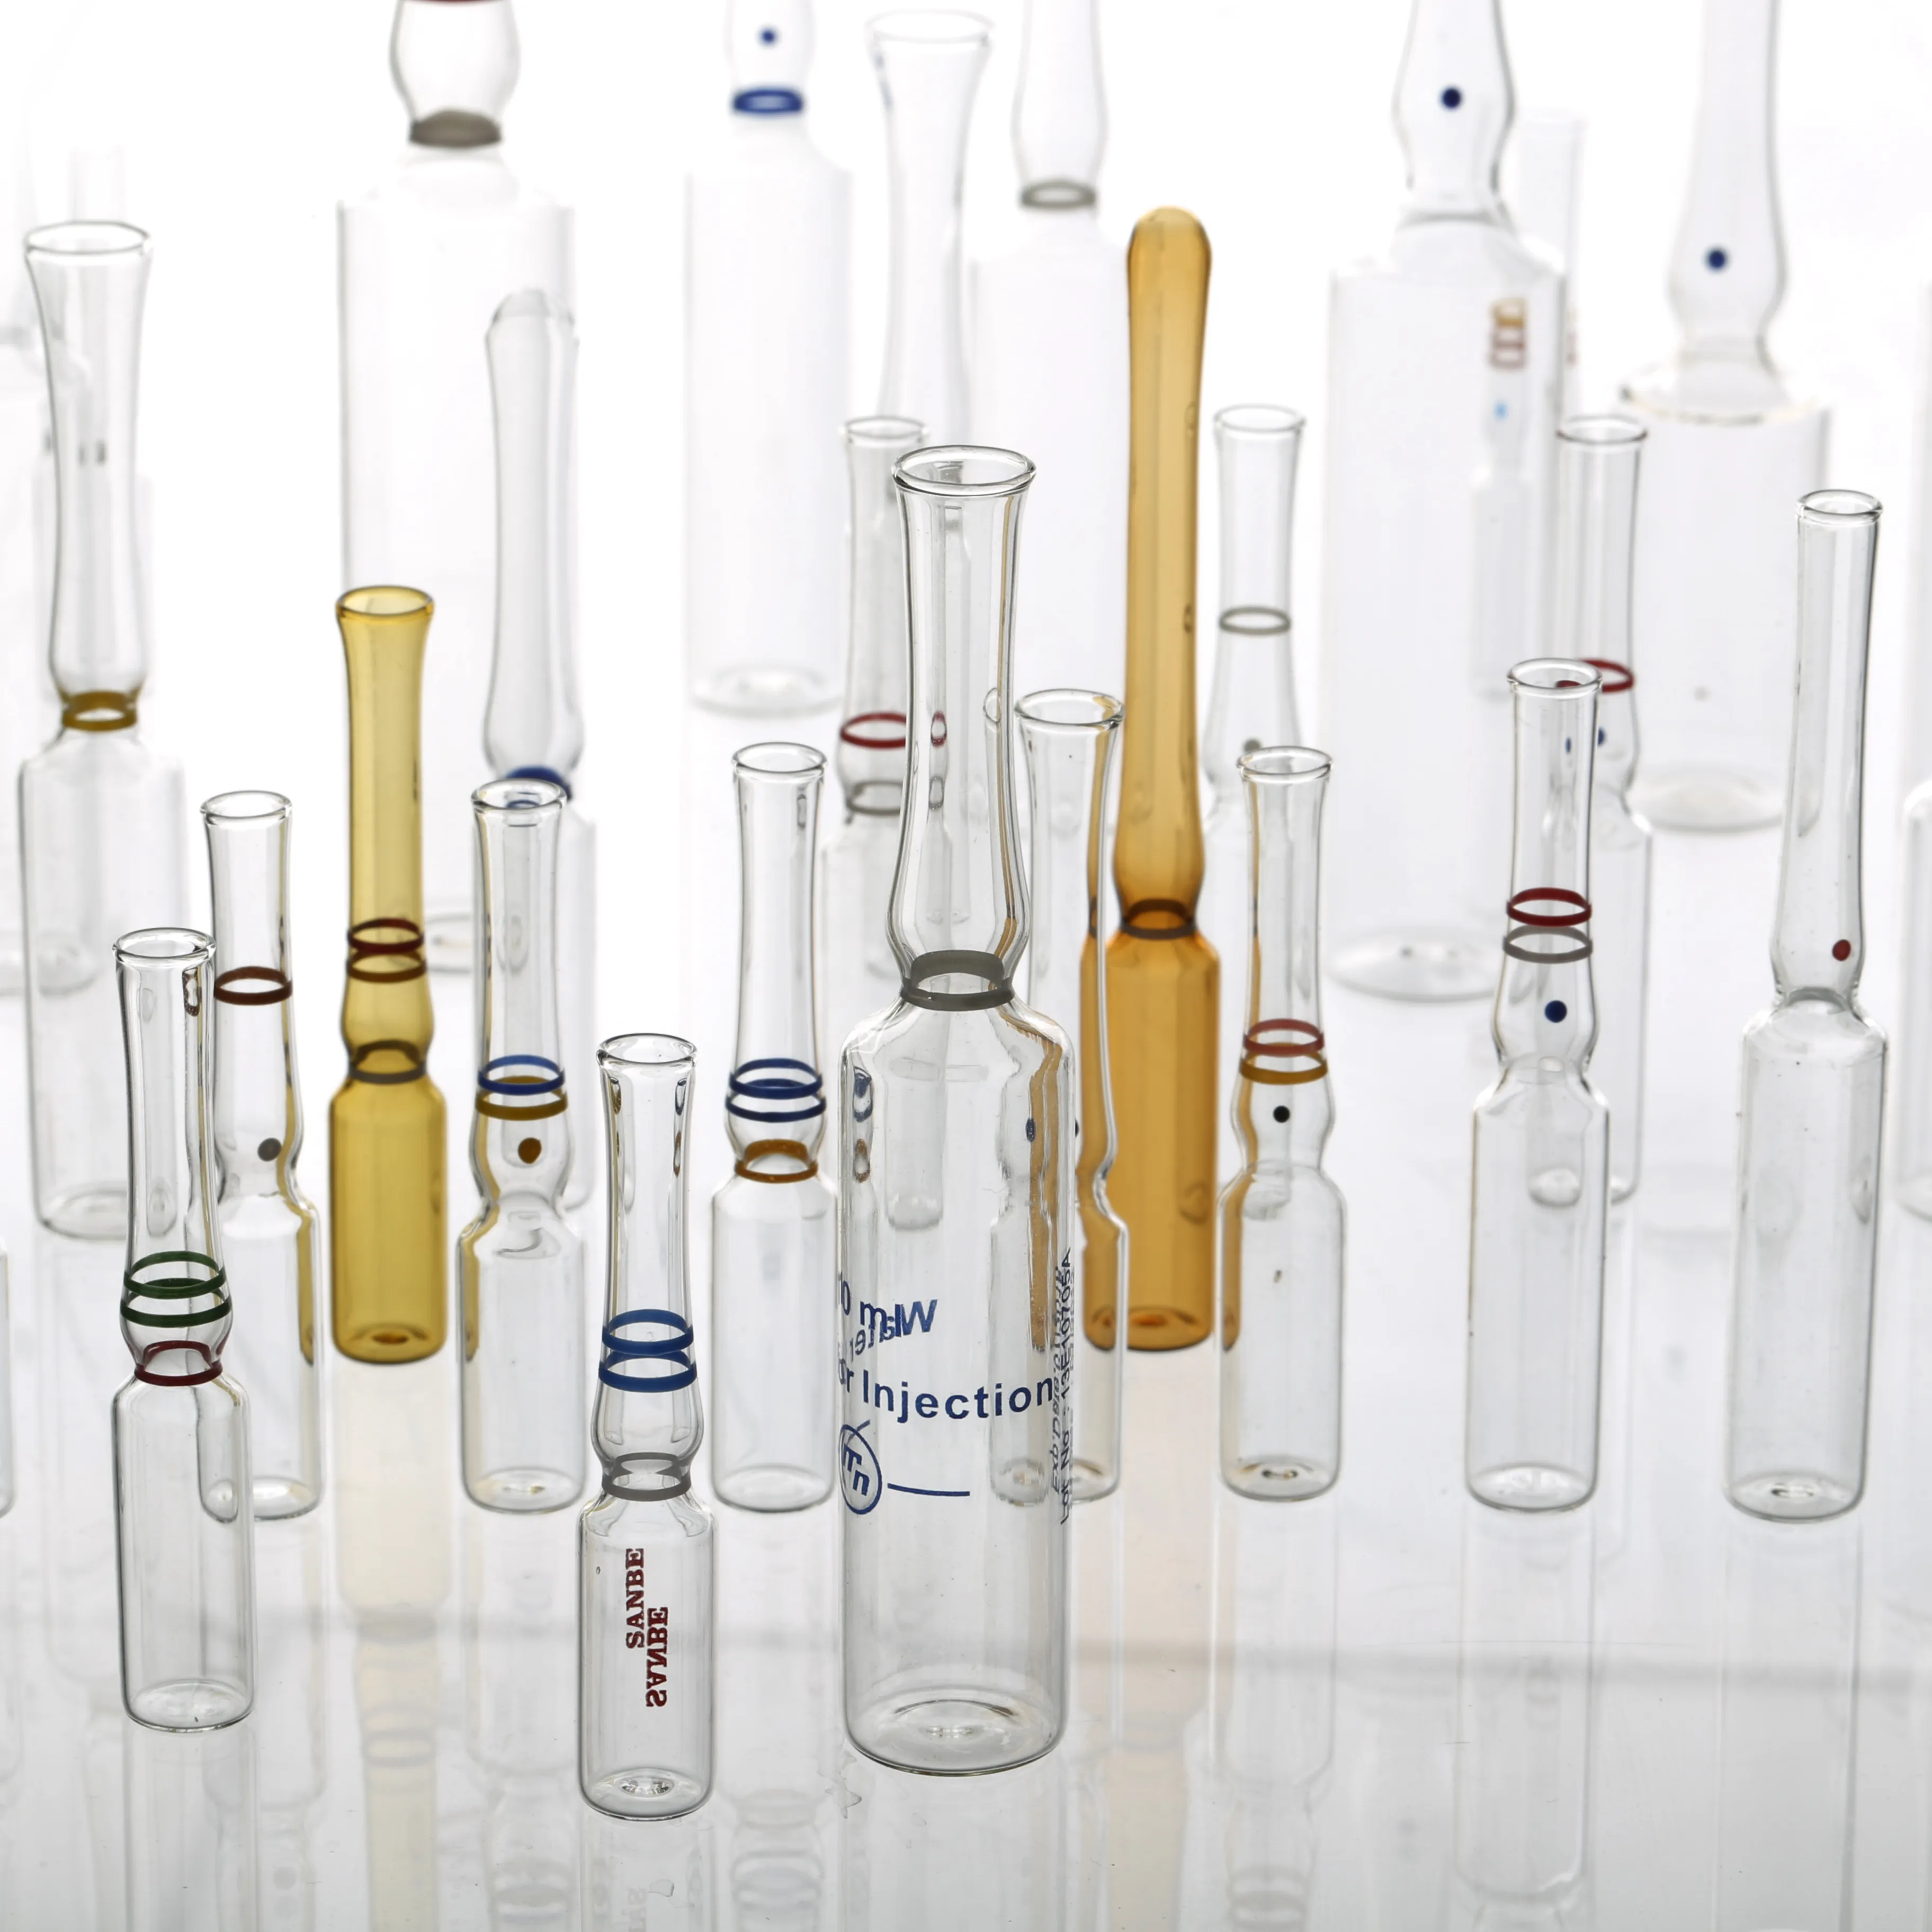 ampoules and vials for injection